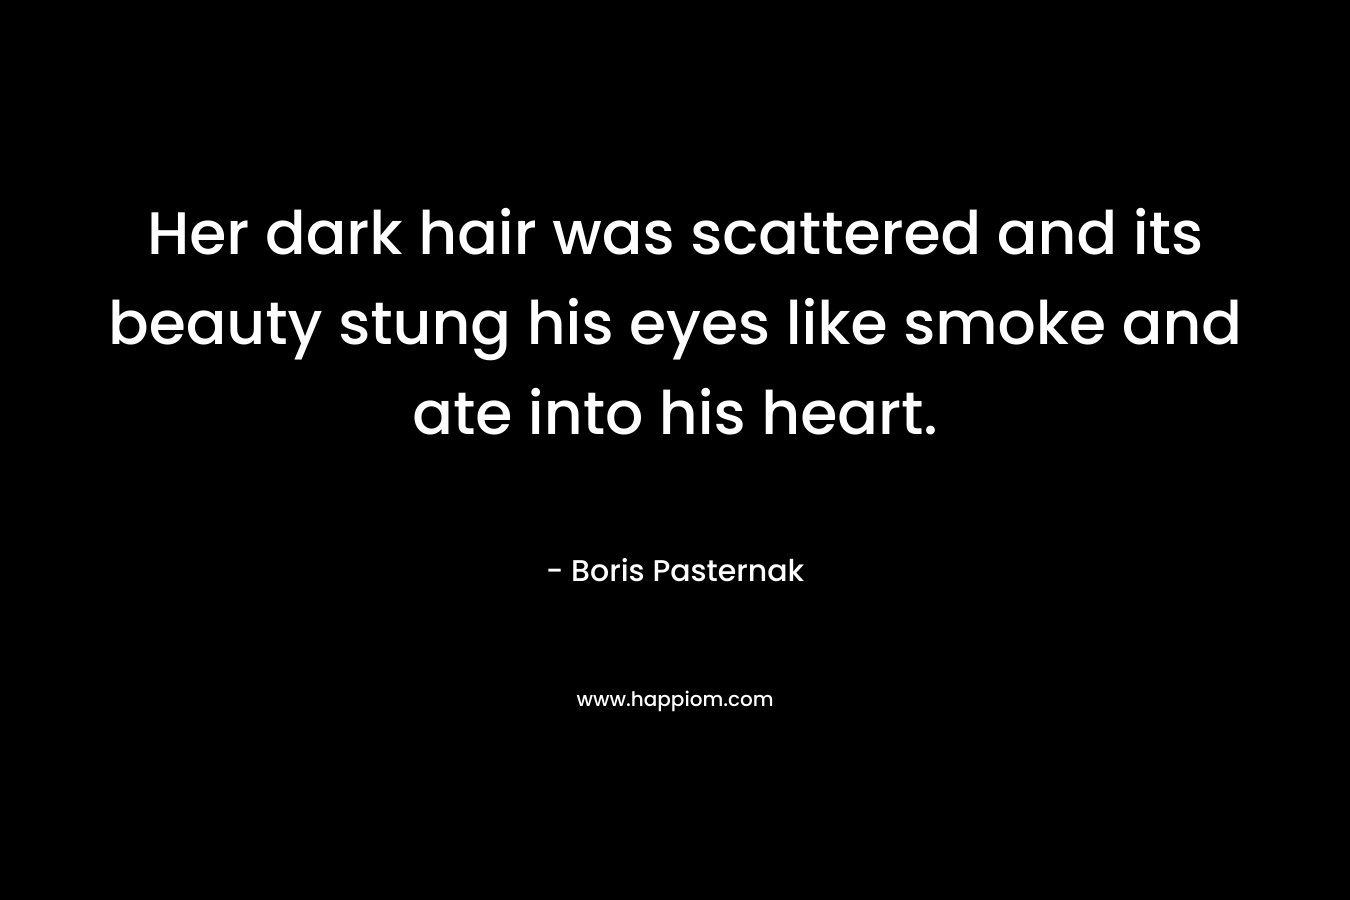 Her dark hair was scattered and its beauty stung his eyes like smoke and ate into his heart. – Boris Pasternak